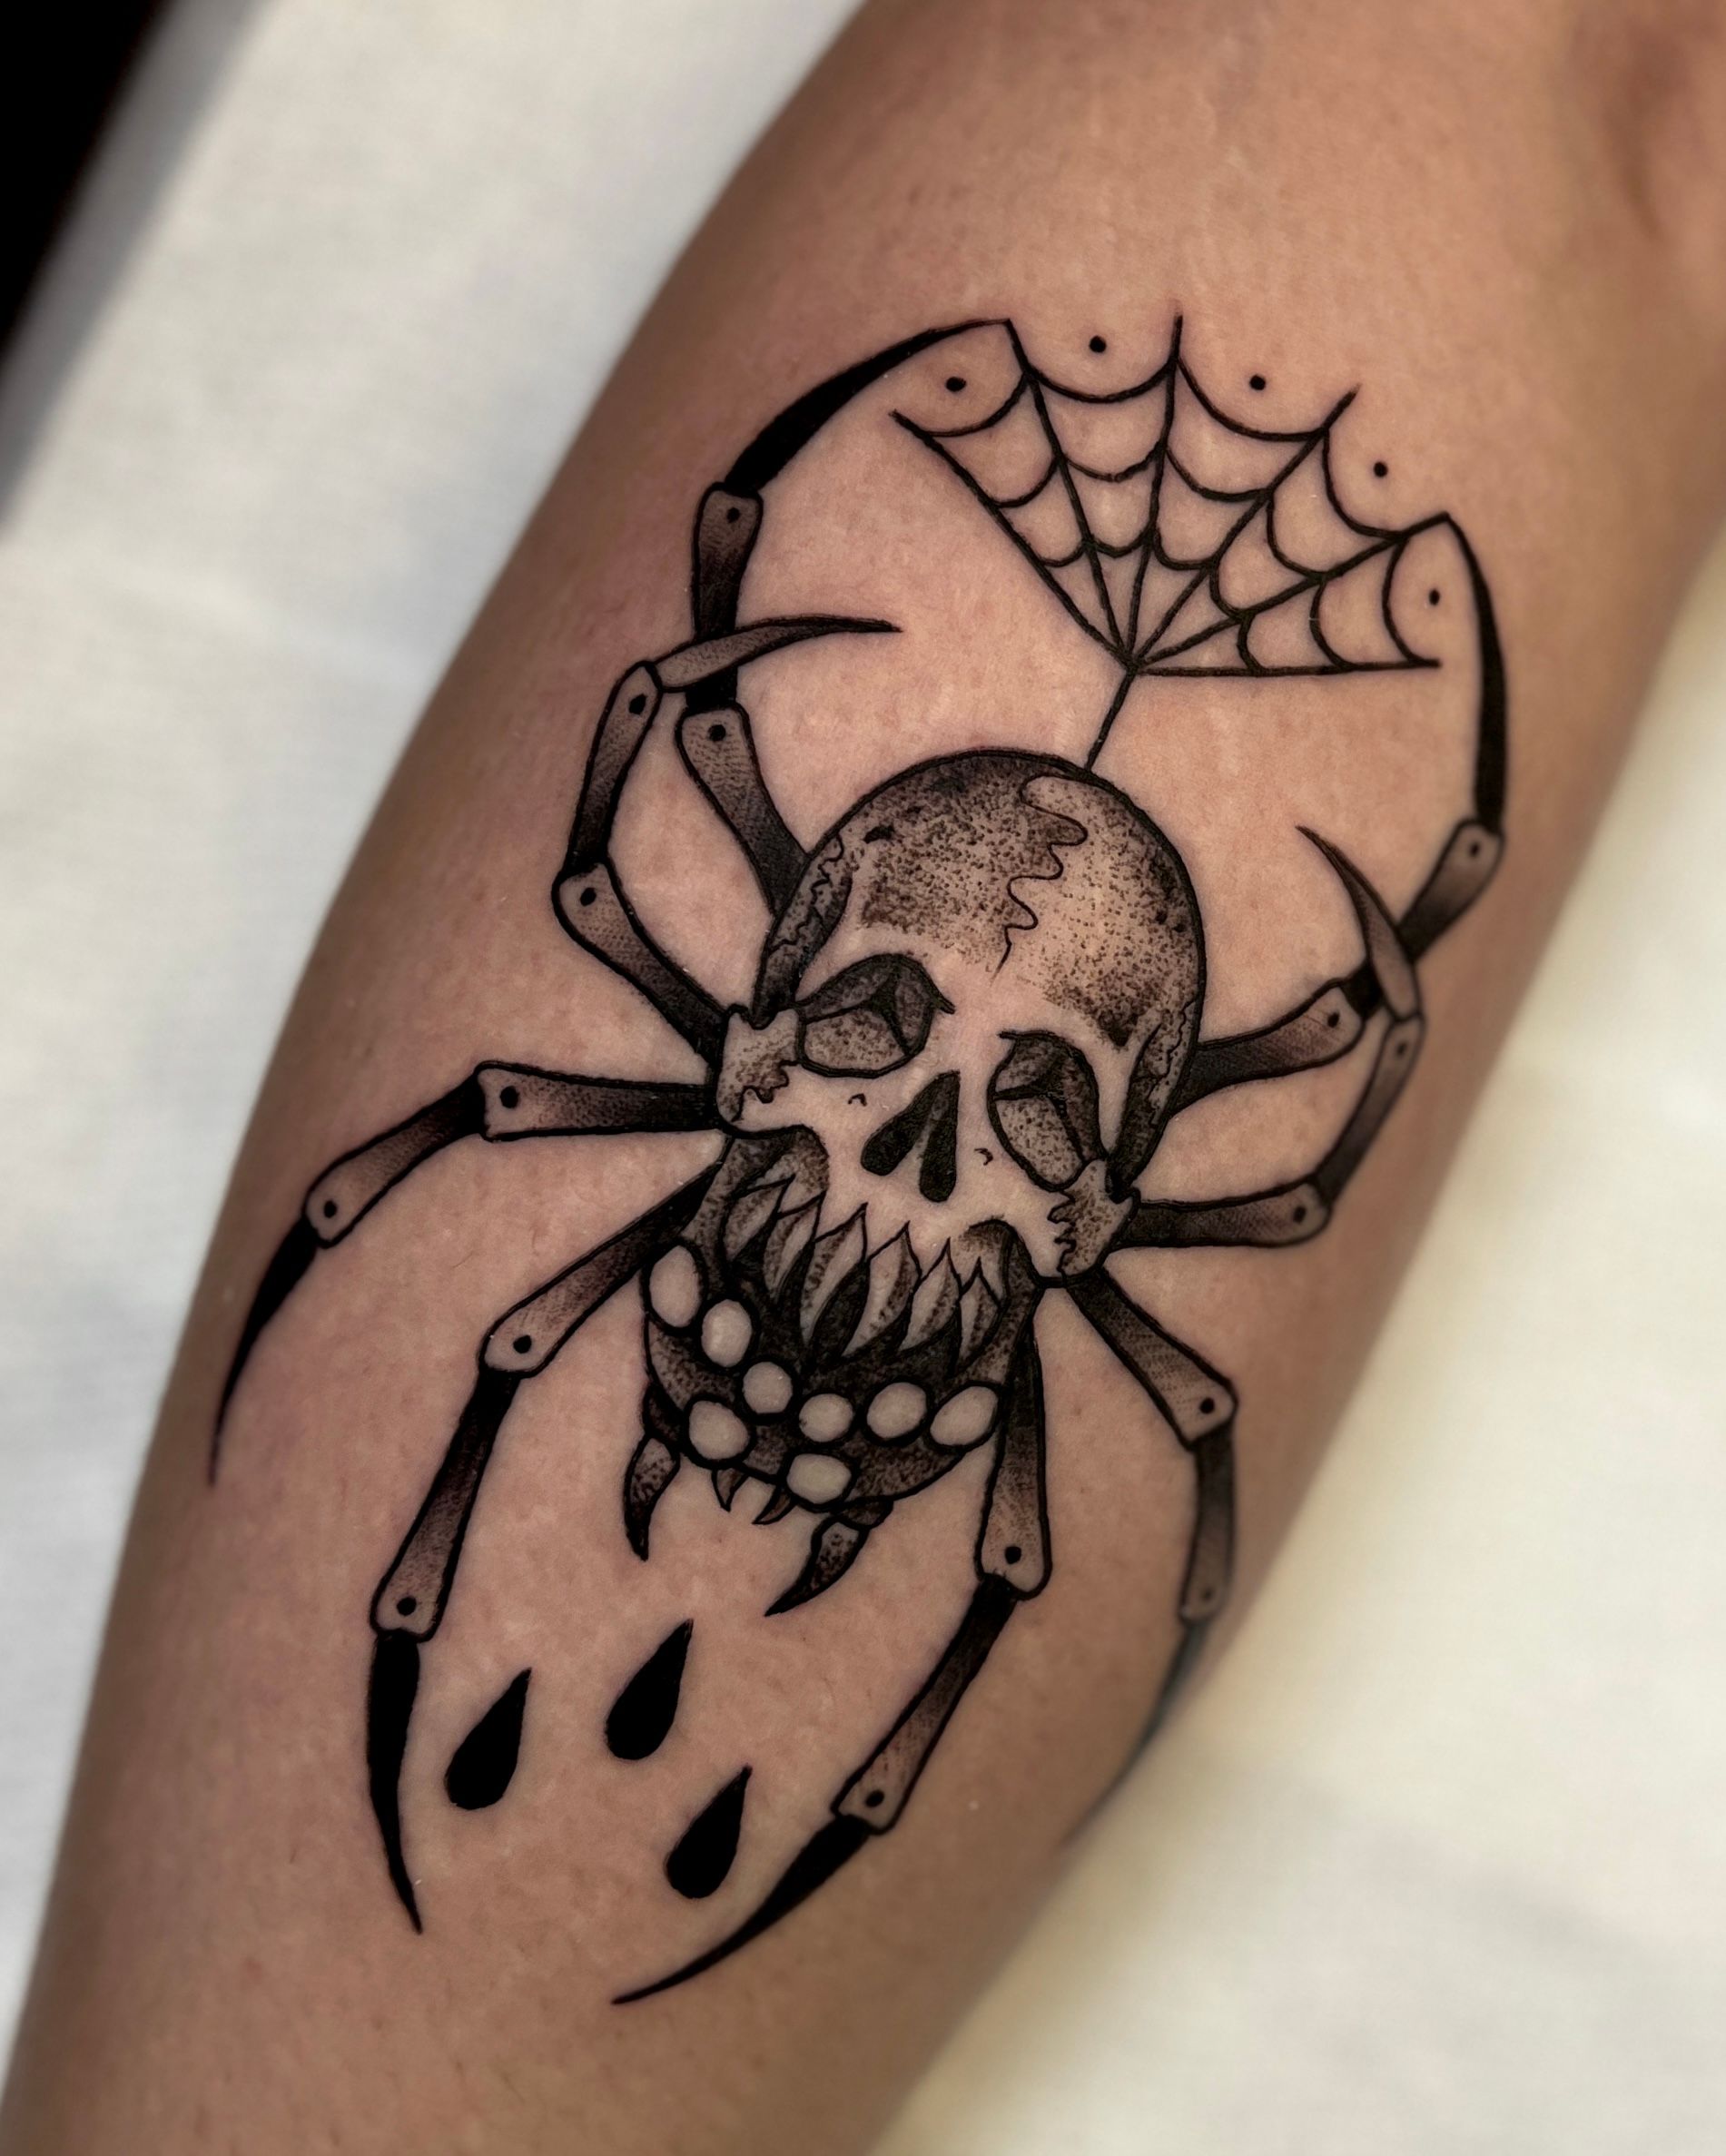 I hate spiders irl, but they're such dope tattoos 😍 Finally dropping my  first set of #halloweentattoo designs! More to come! #fla... | Instagram